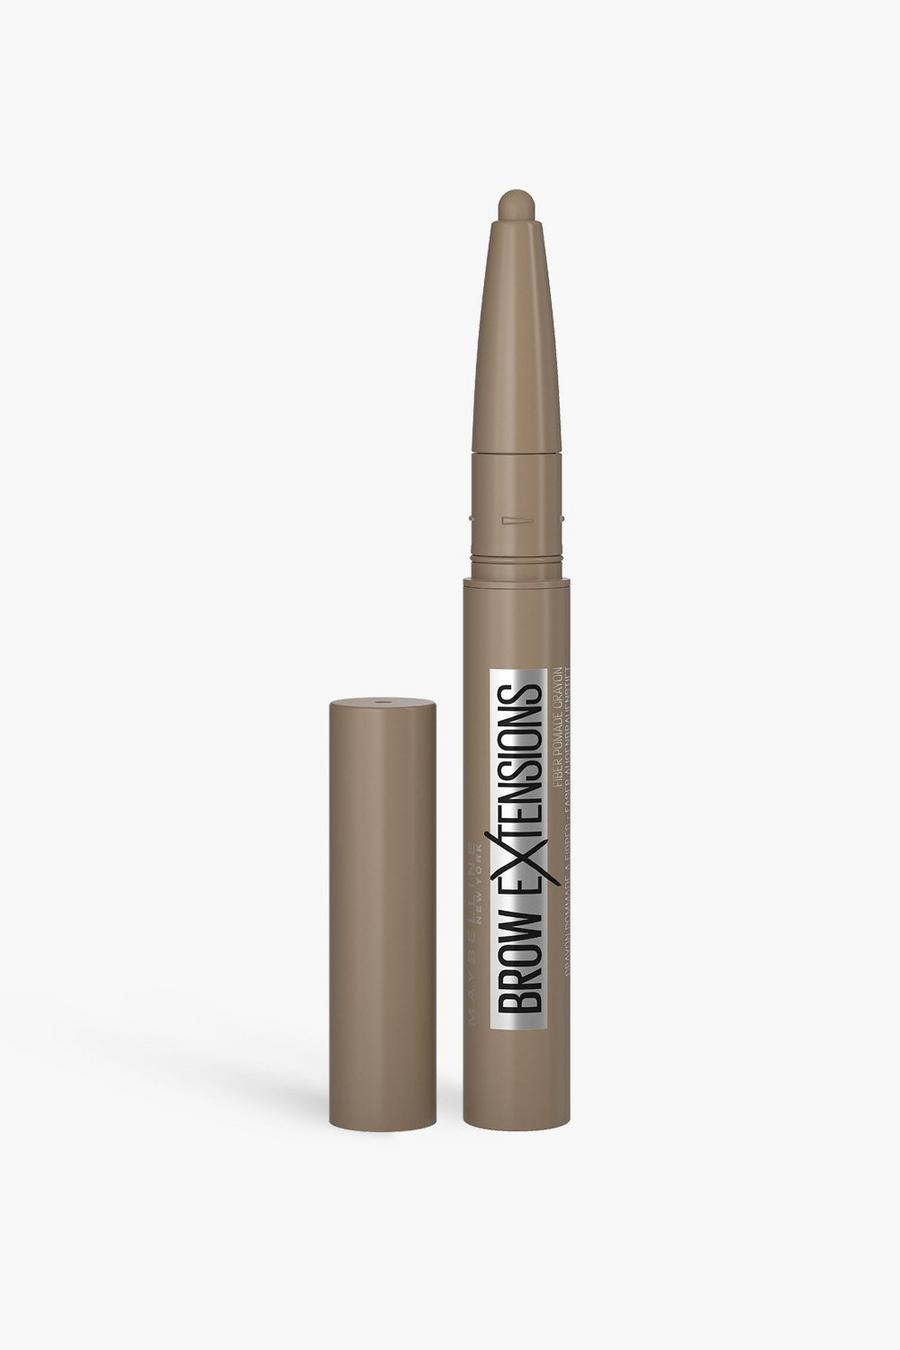 Maybelline Brow Extensions Eyebrow Pomade Crayon - 01 Blonde image number 1